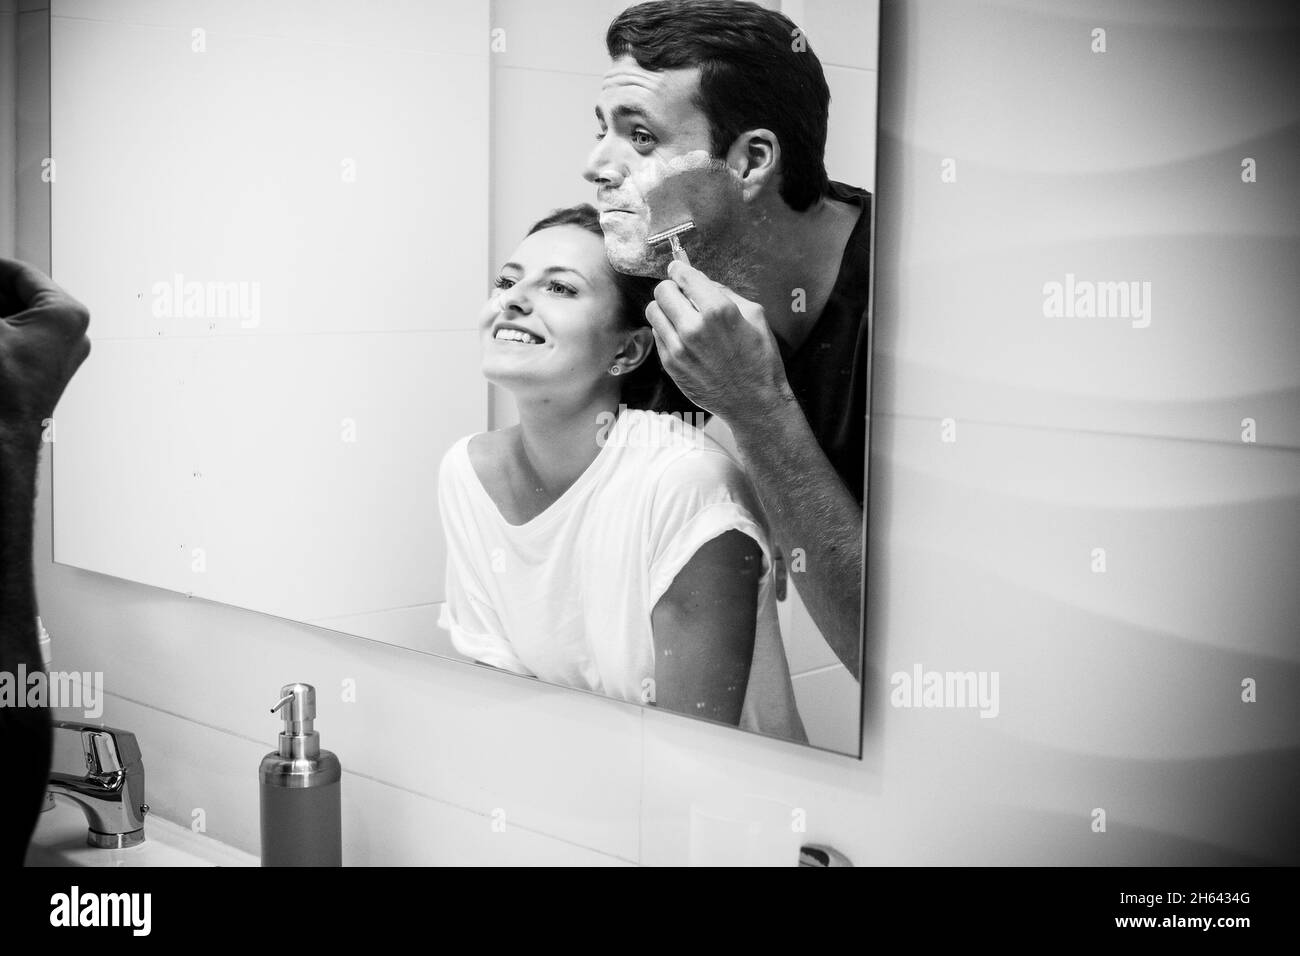 joyful couple having fun in the bathroom during morning while man is shaving his beard using razor and foam. happy couple getting ready together in the domestic bathroom Stock Photo